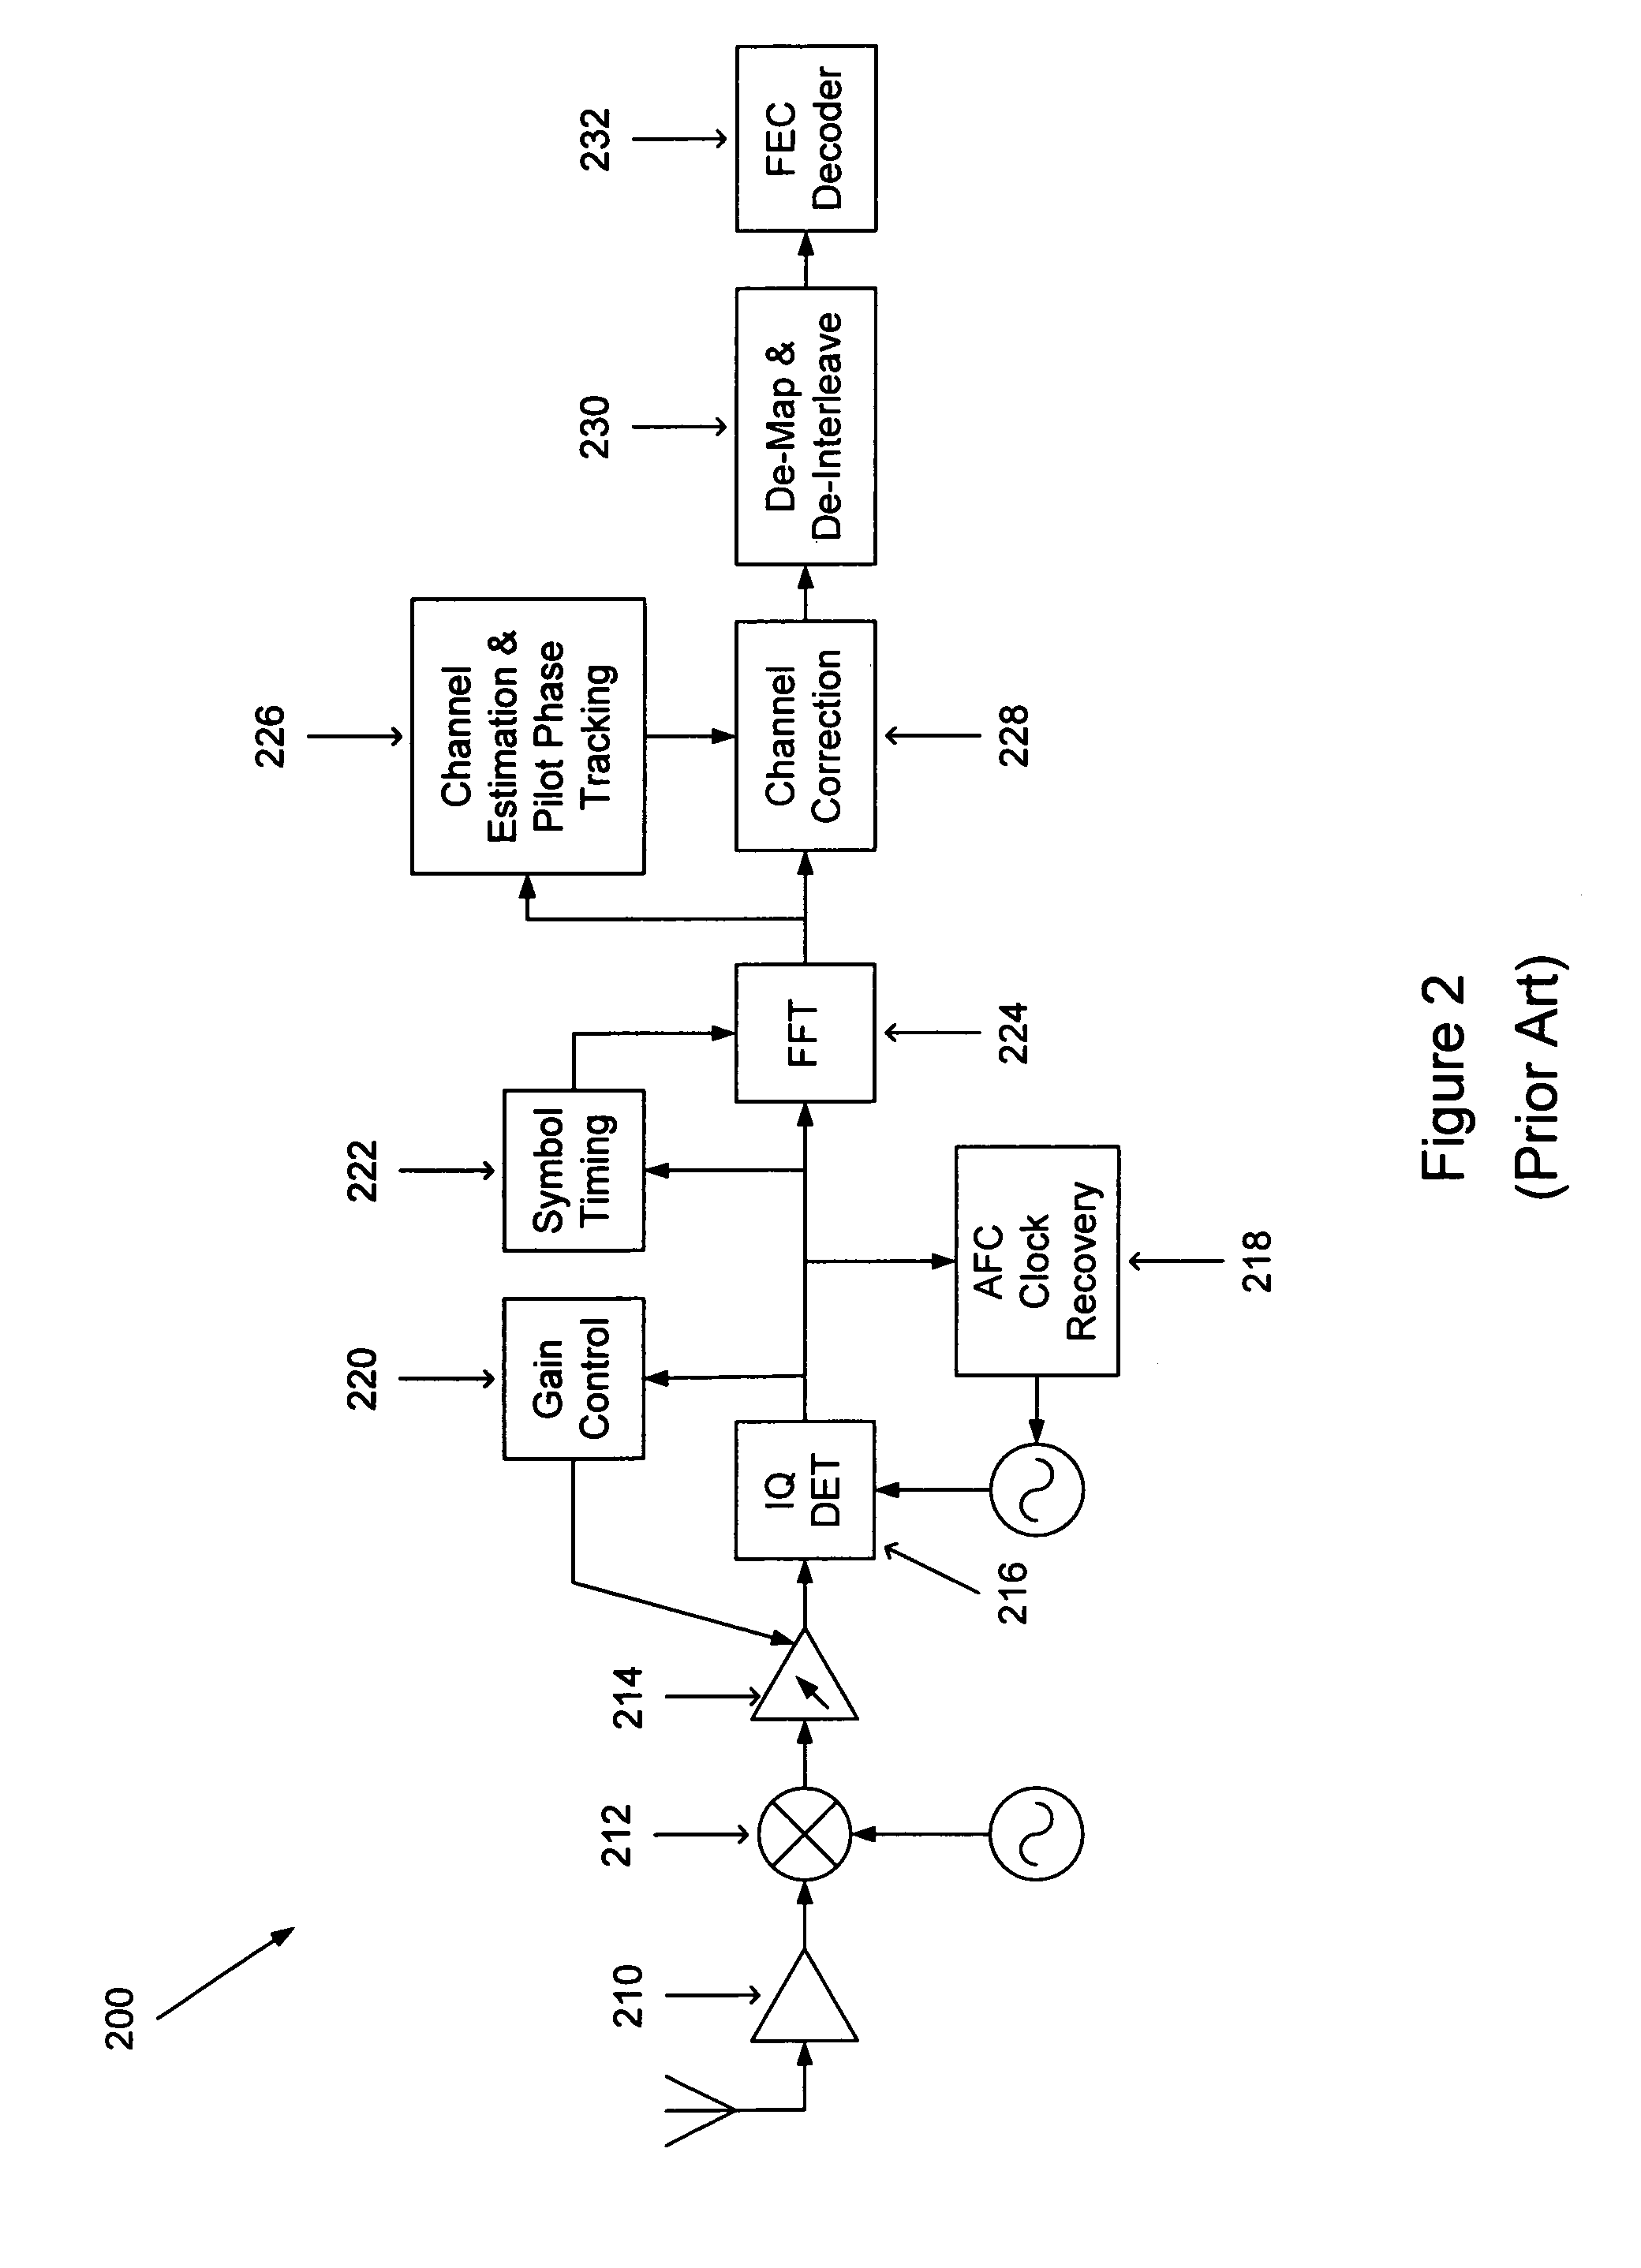 Method and apparatus for maximizing receiver performance utilizing mid-packet gain changes